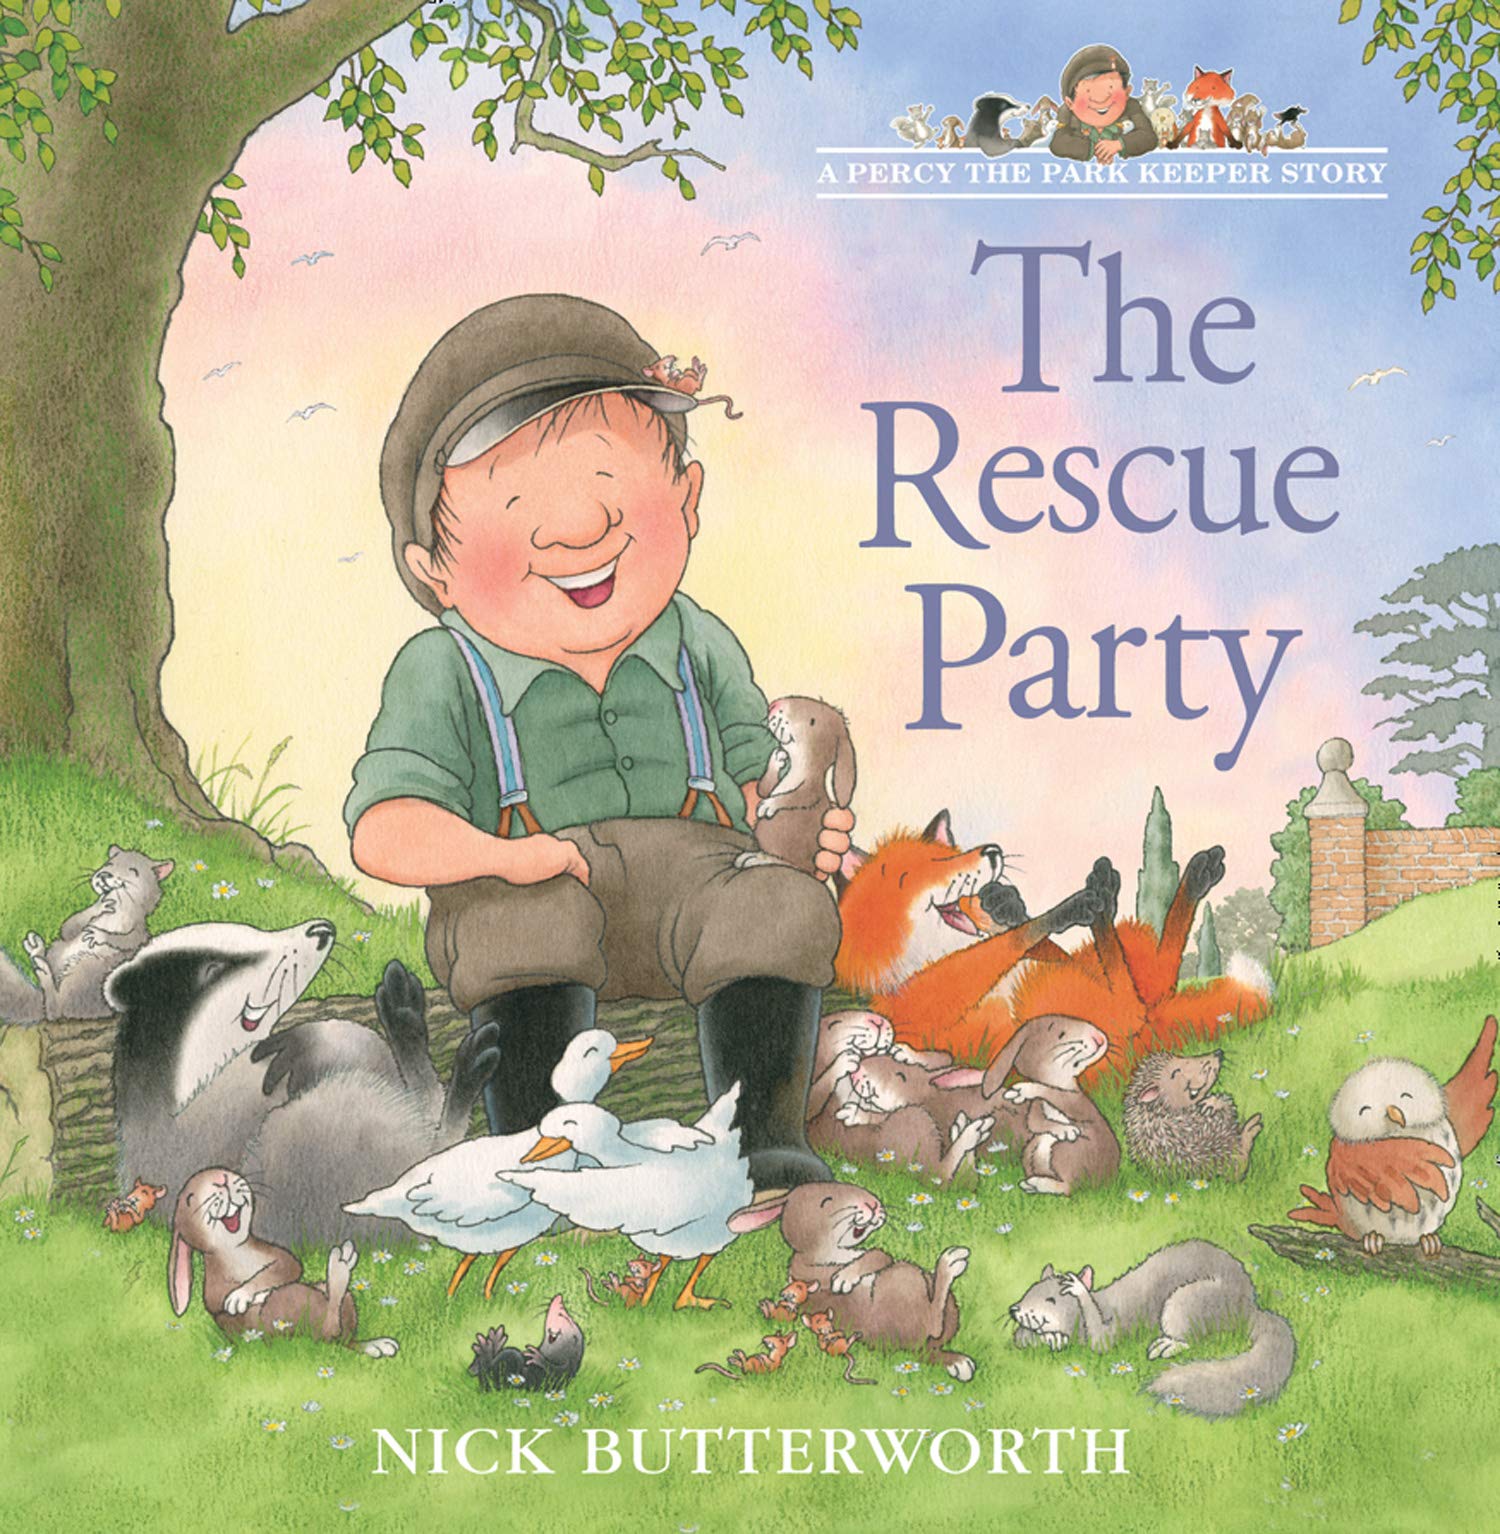 Nick перевести. Nick Butterworth. Percy the Park Keeper a book. Rescue. Percy the Park Keeper after the Storm na russkom.